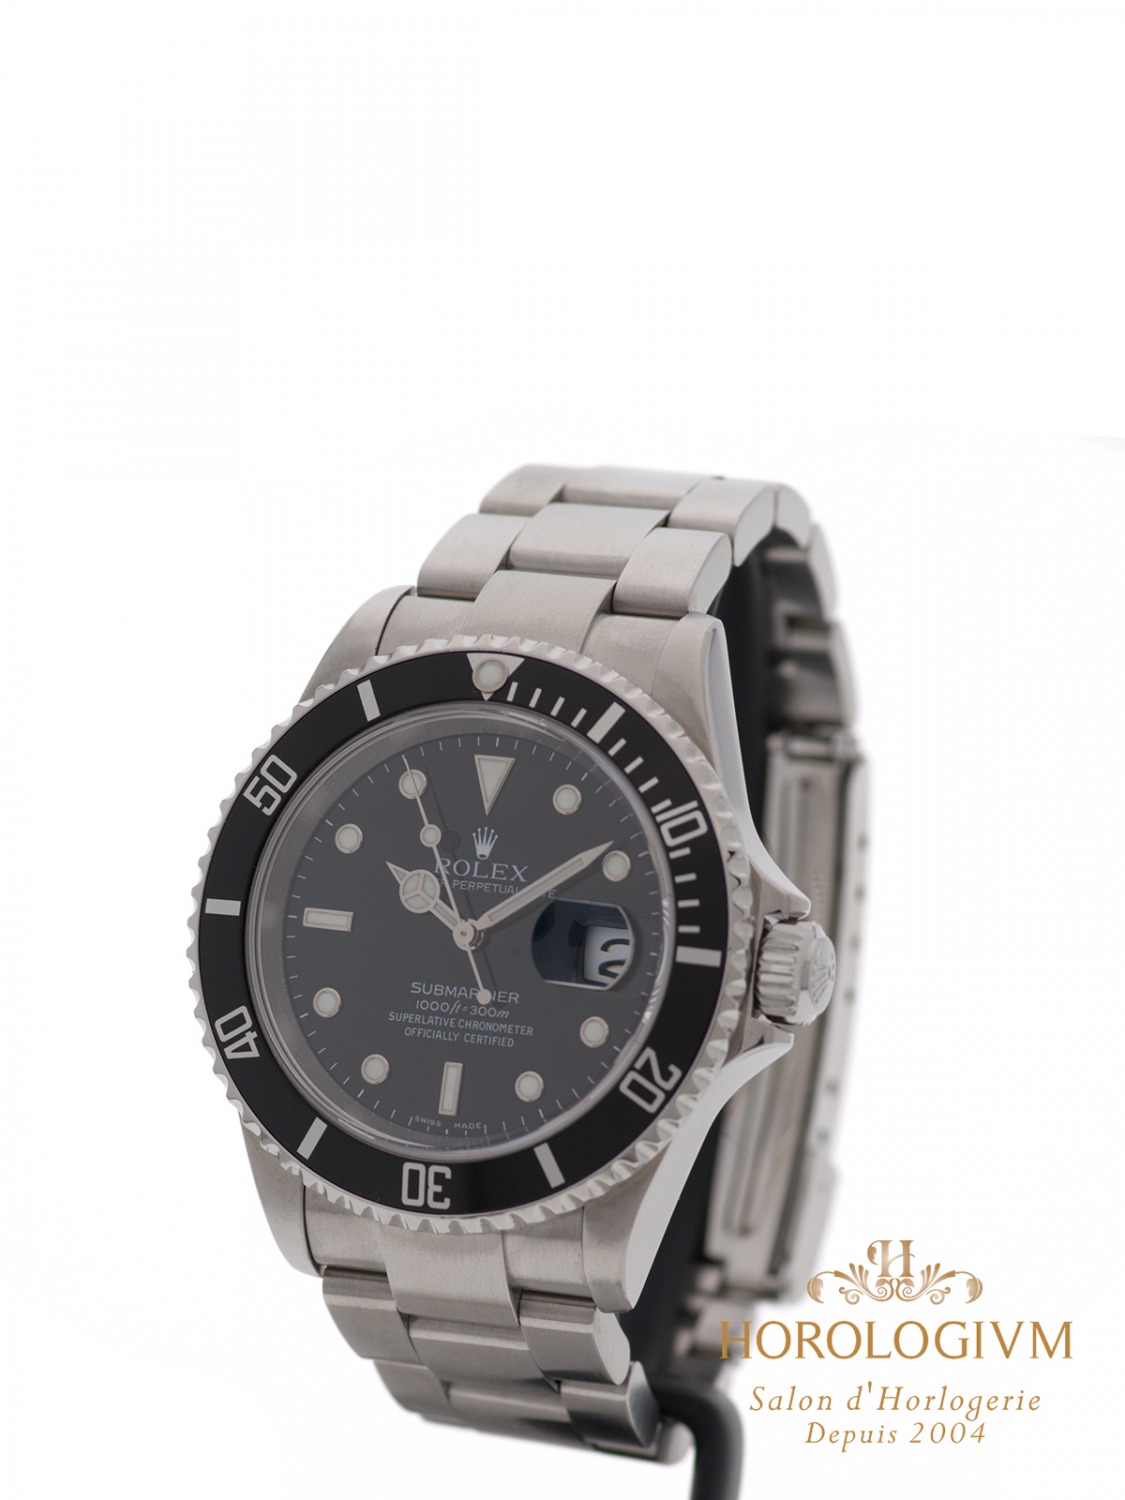 Rolex Submariner Oyster Perpetual Date Ref. 16610 watch, silver